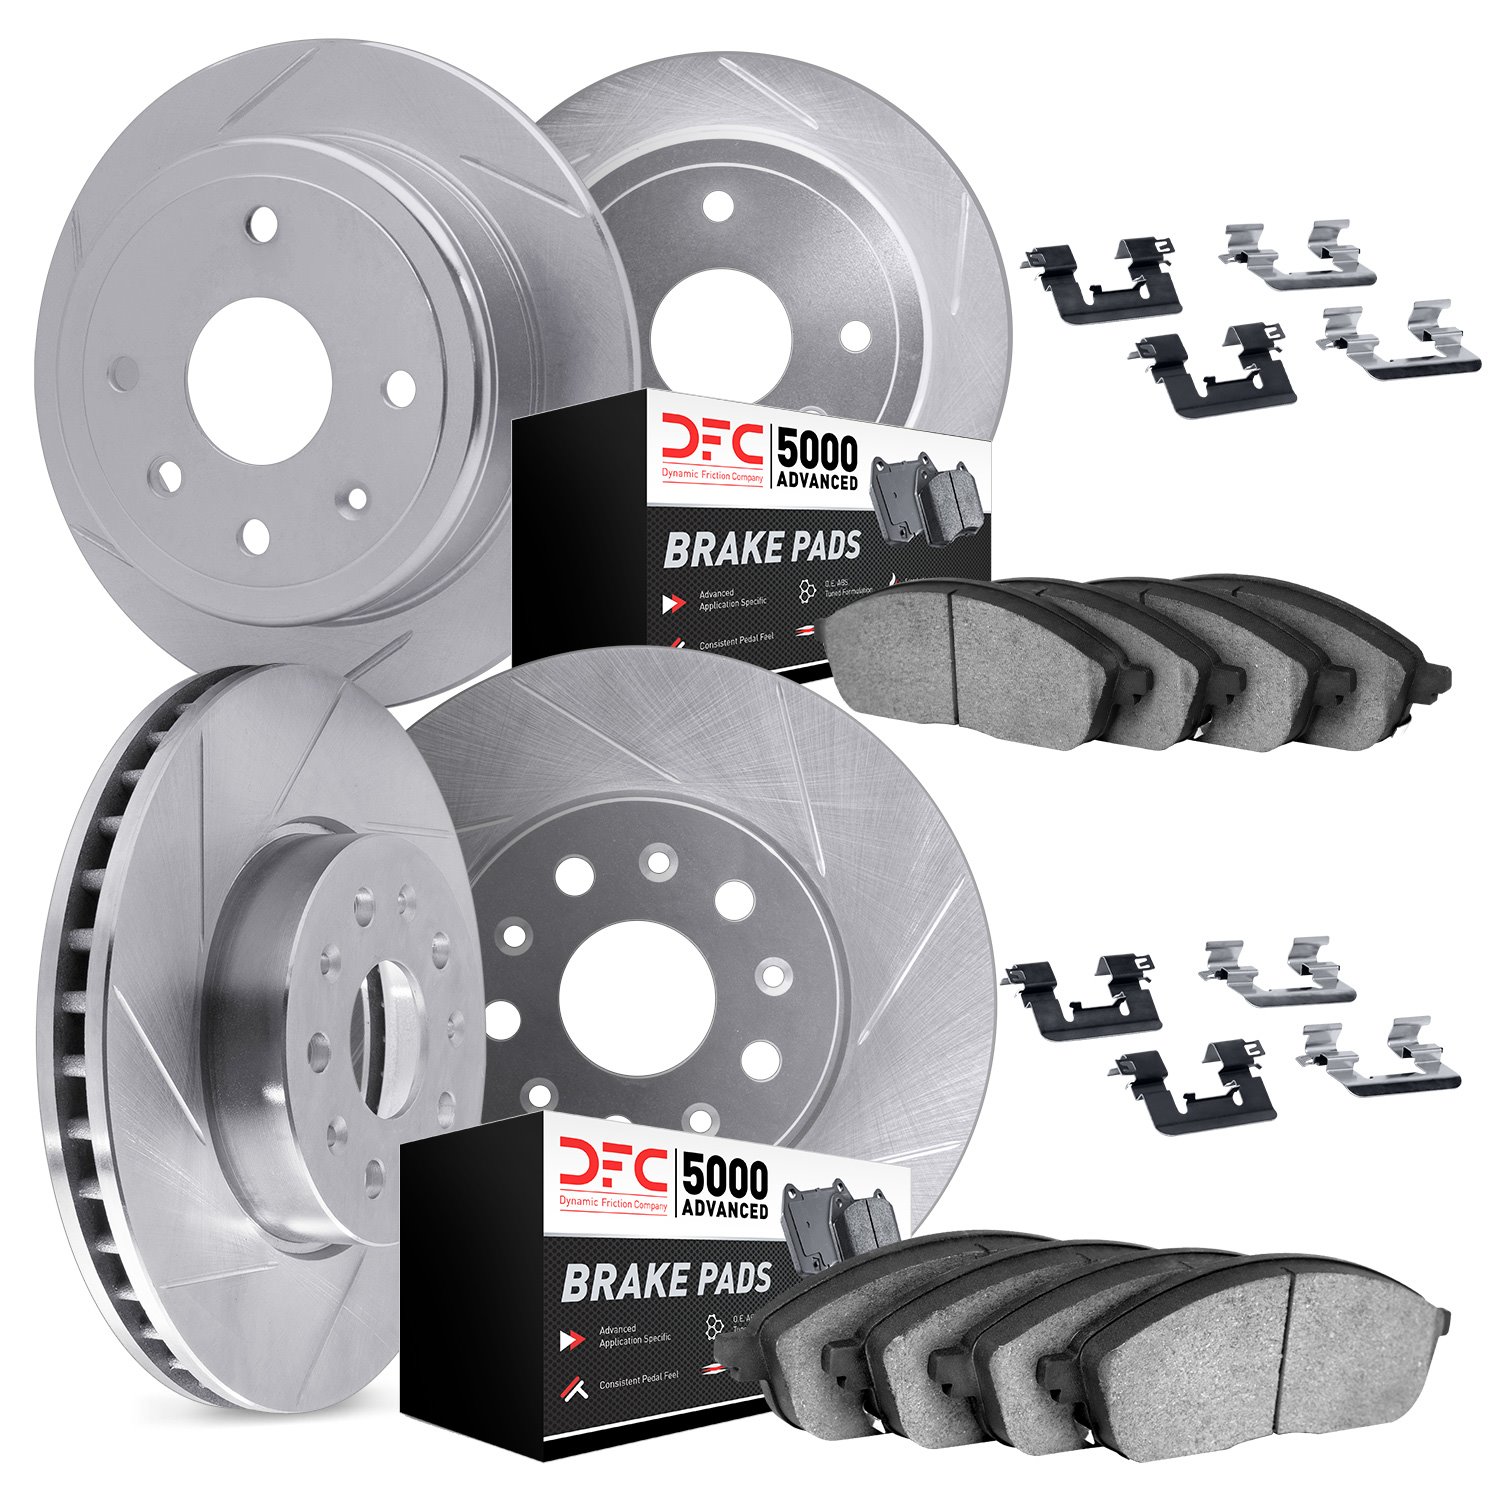 5514-31040 Slotted Brake Rotors w/5000 Advanced Brake Pads Kit & Hardware [Silver], 2000-2006 BMW, Position: Front and Rear